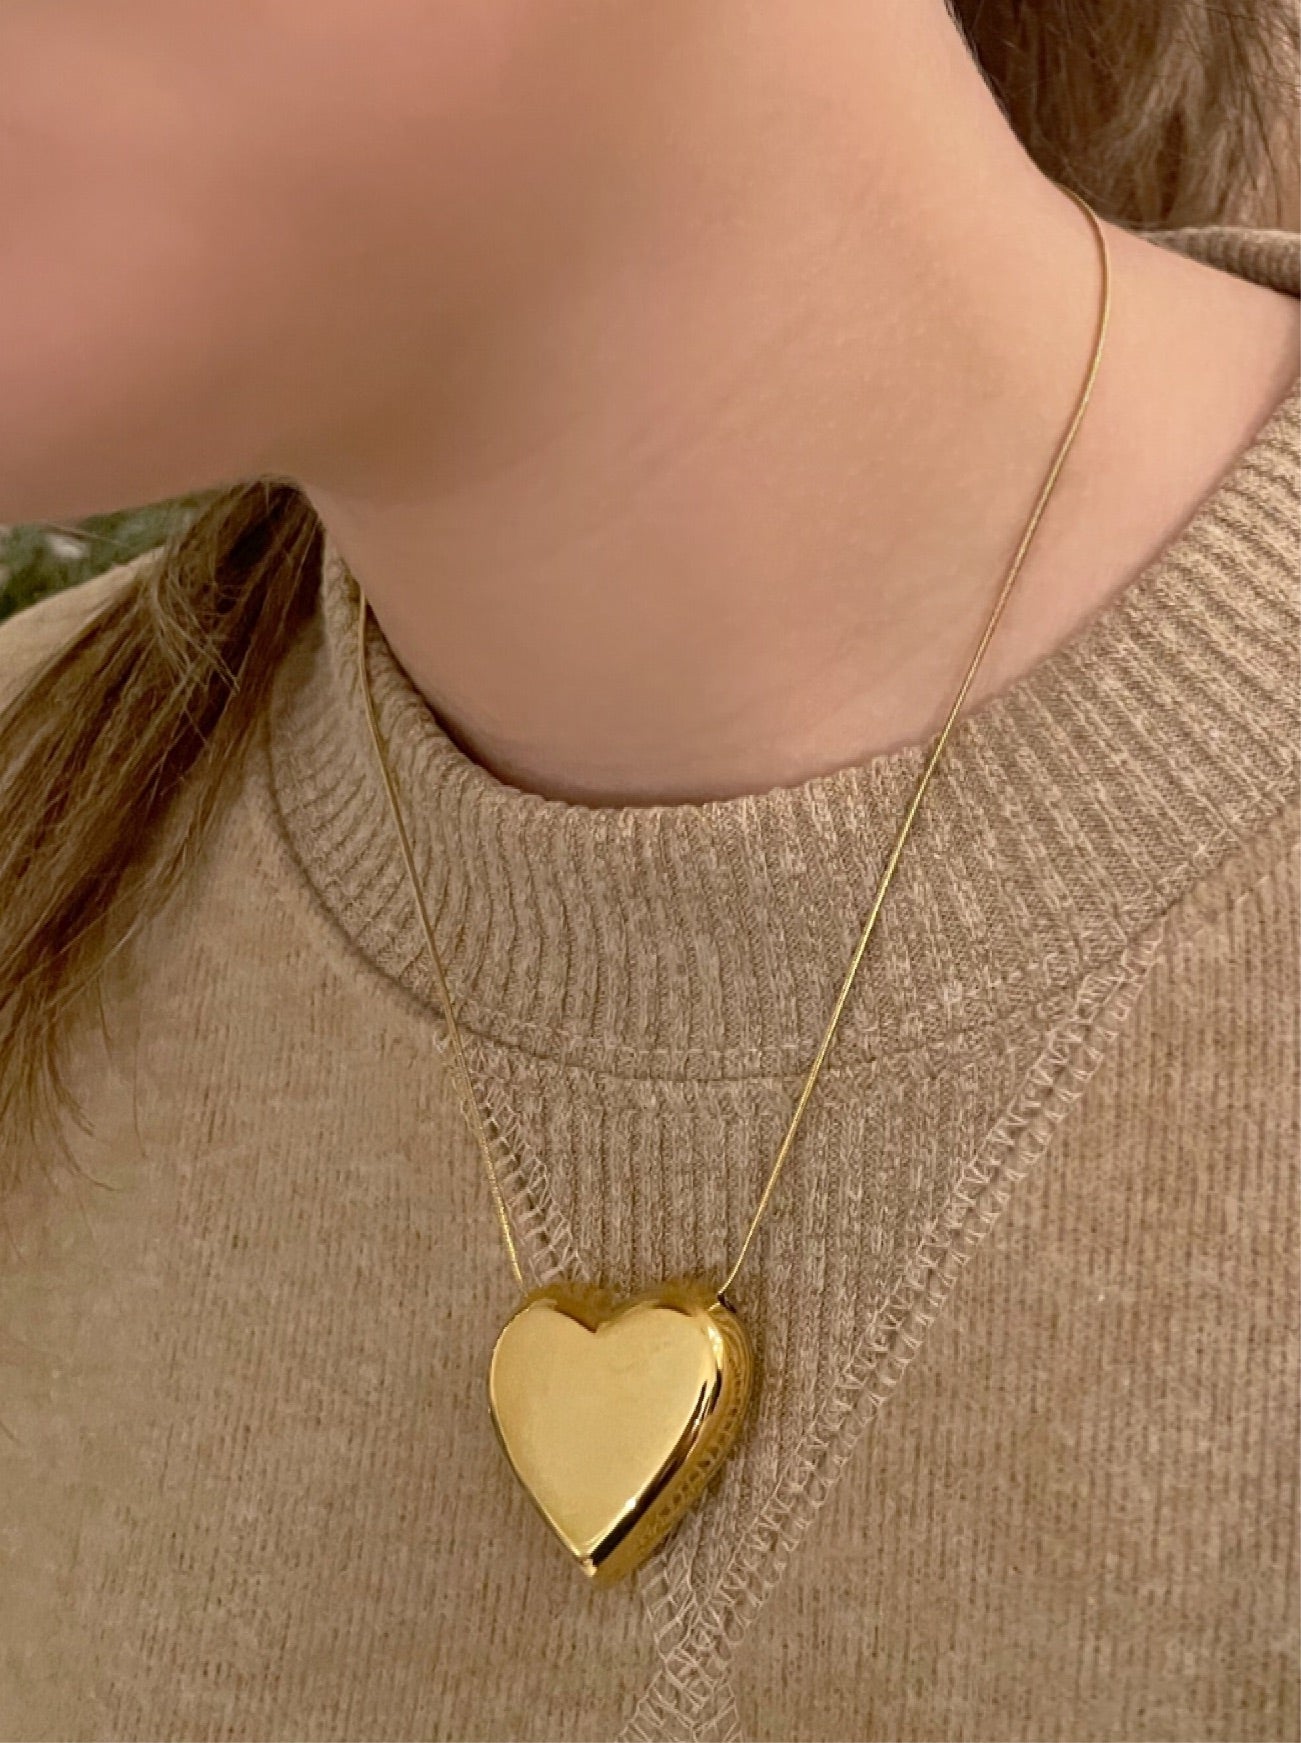 Heart shaped pendant necklace